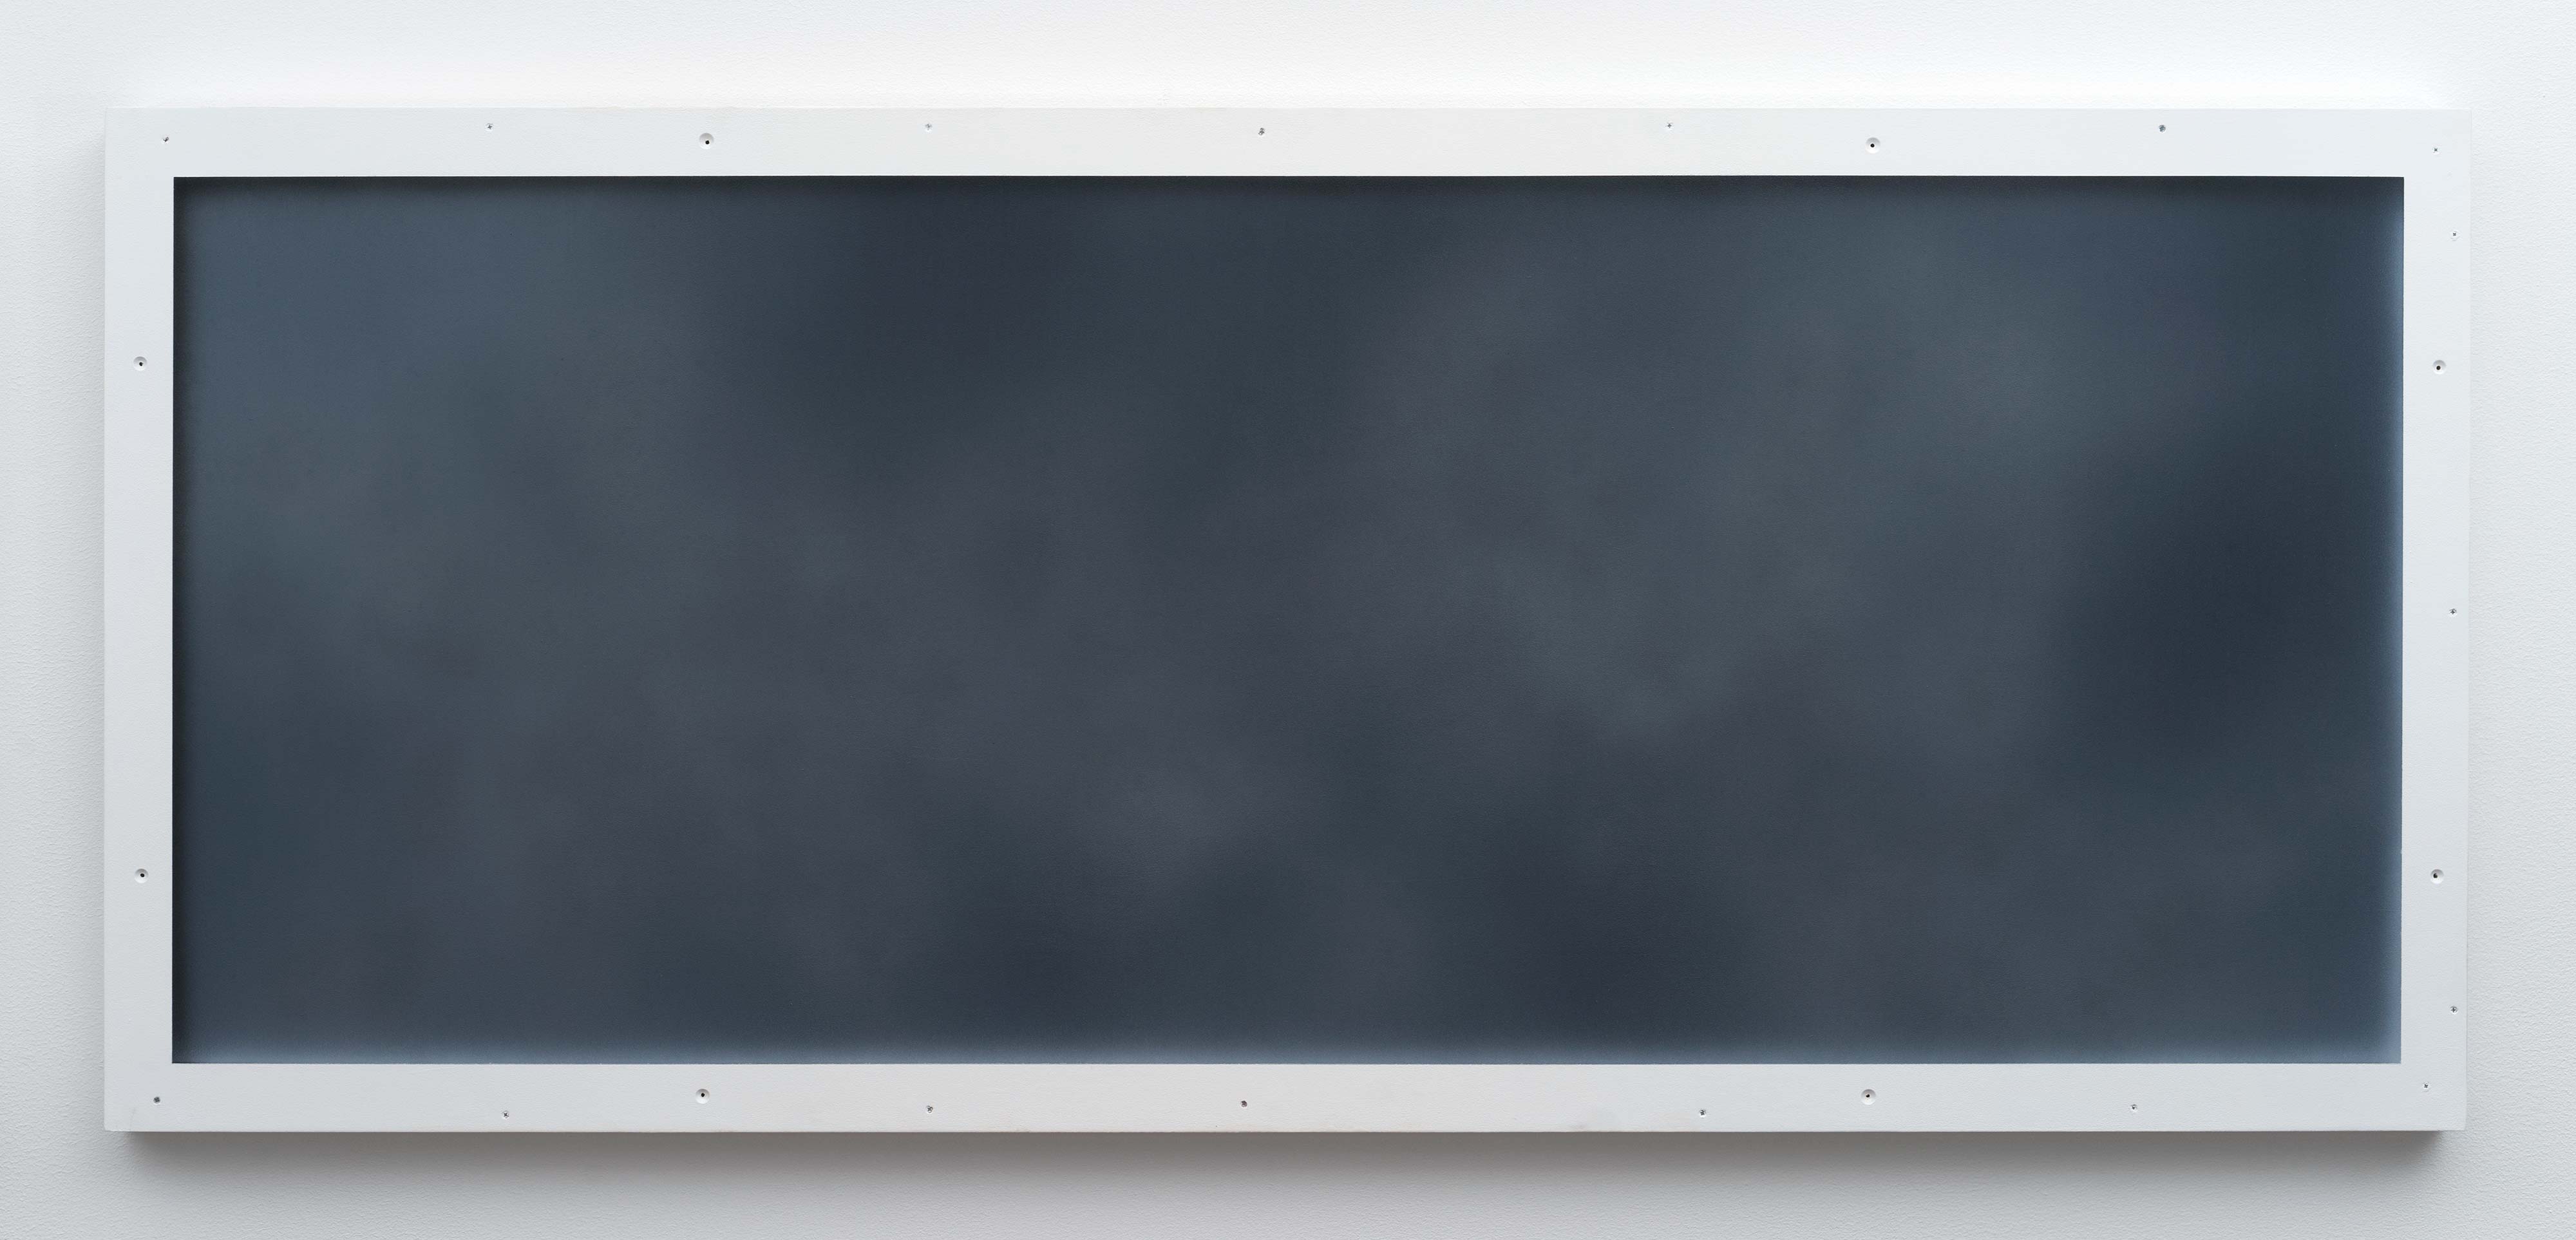 Christopher Page<br>Nocturne (VI)<br>2016<br>oil and acrylic on panel<br>23.6 x 54.3 in (60 x 138 cm)